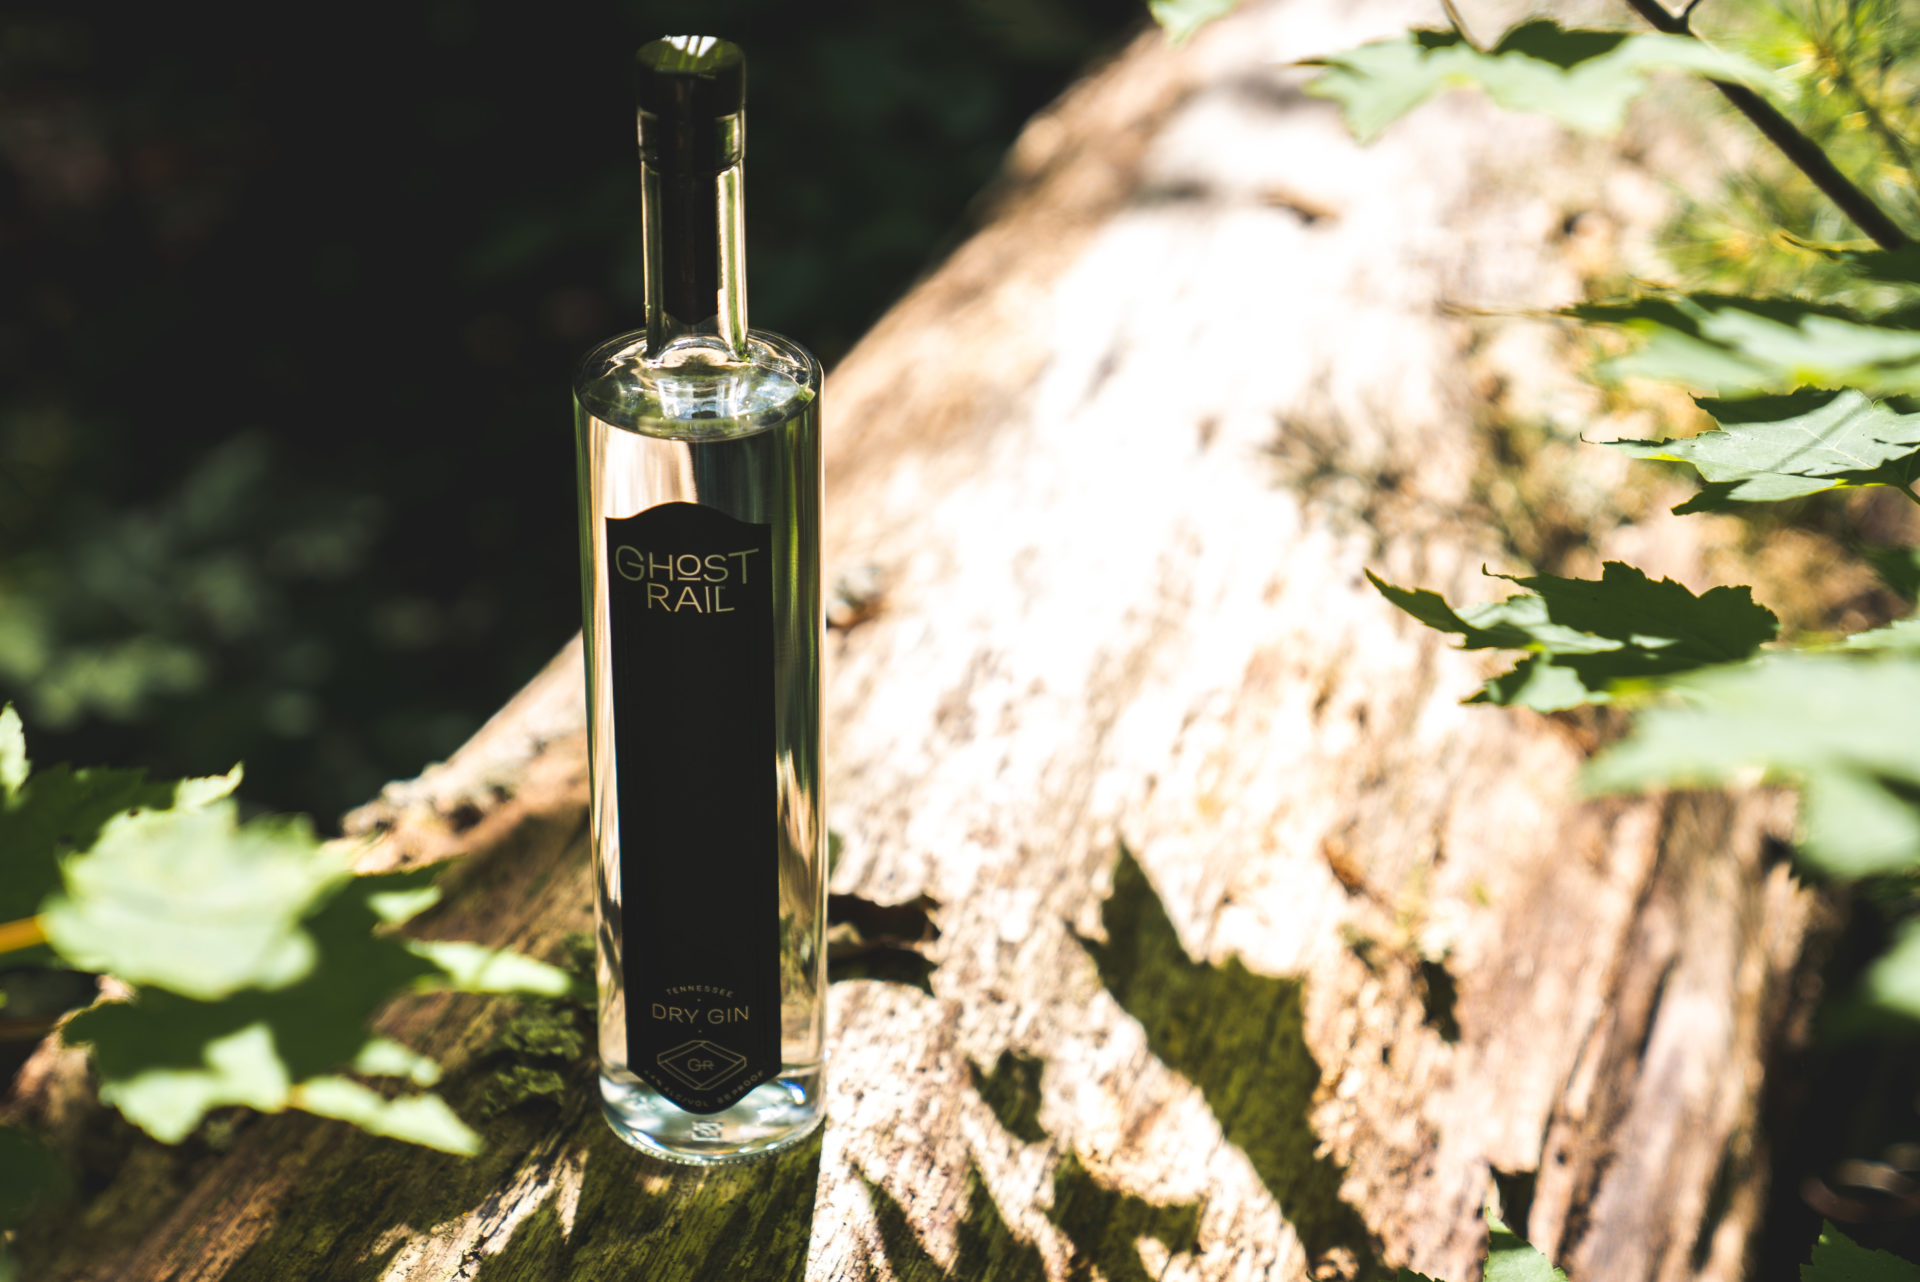 Close-up product photography of Ghost Rail Dry Gin in East Tennessee forest.